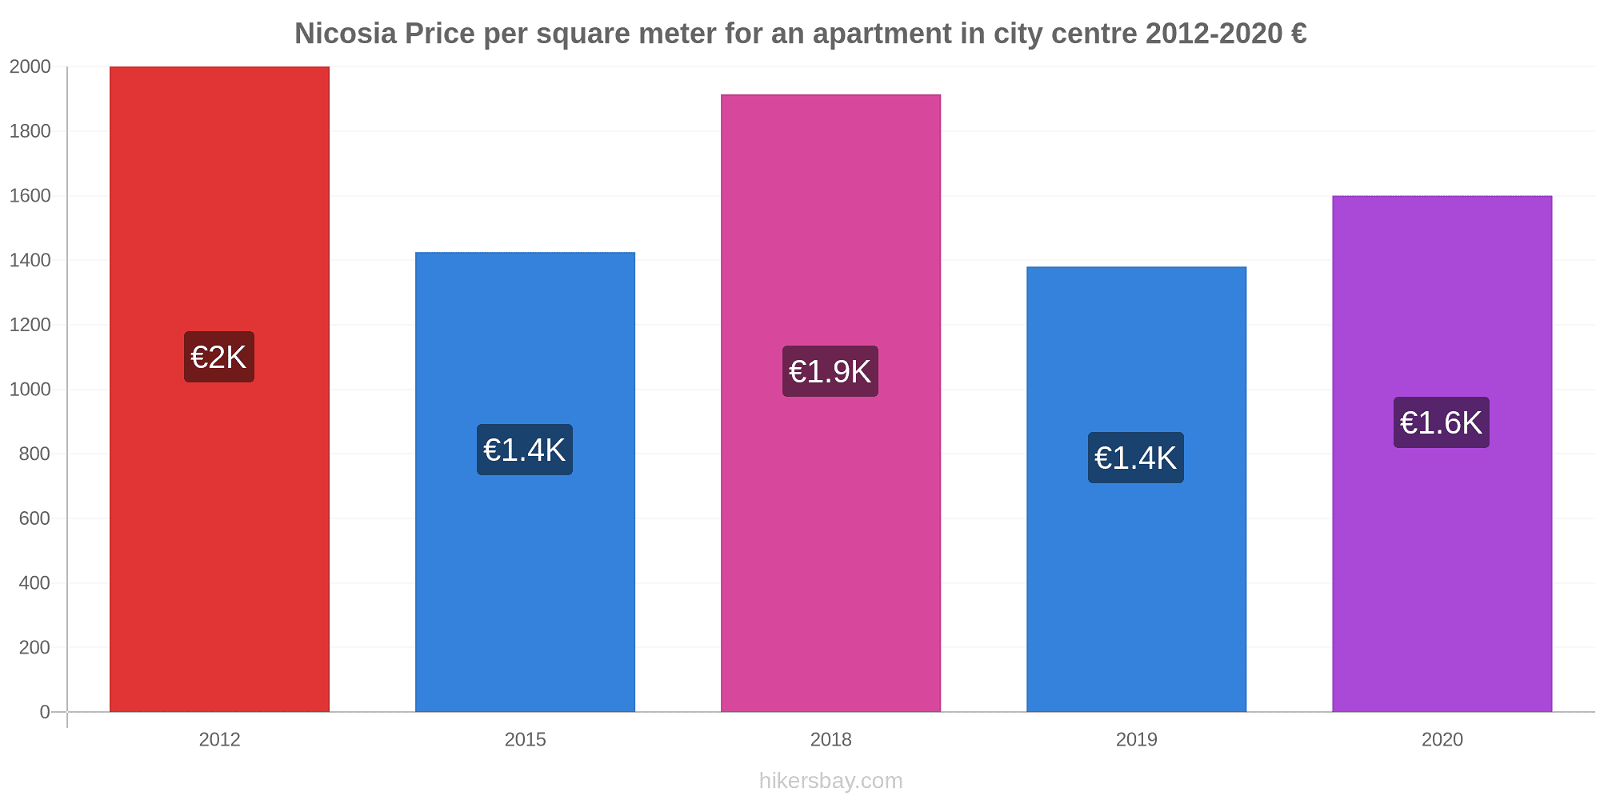 Nicosia price changes Price per square meter for an apartment in city centre hikersbay.com